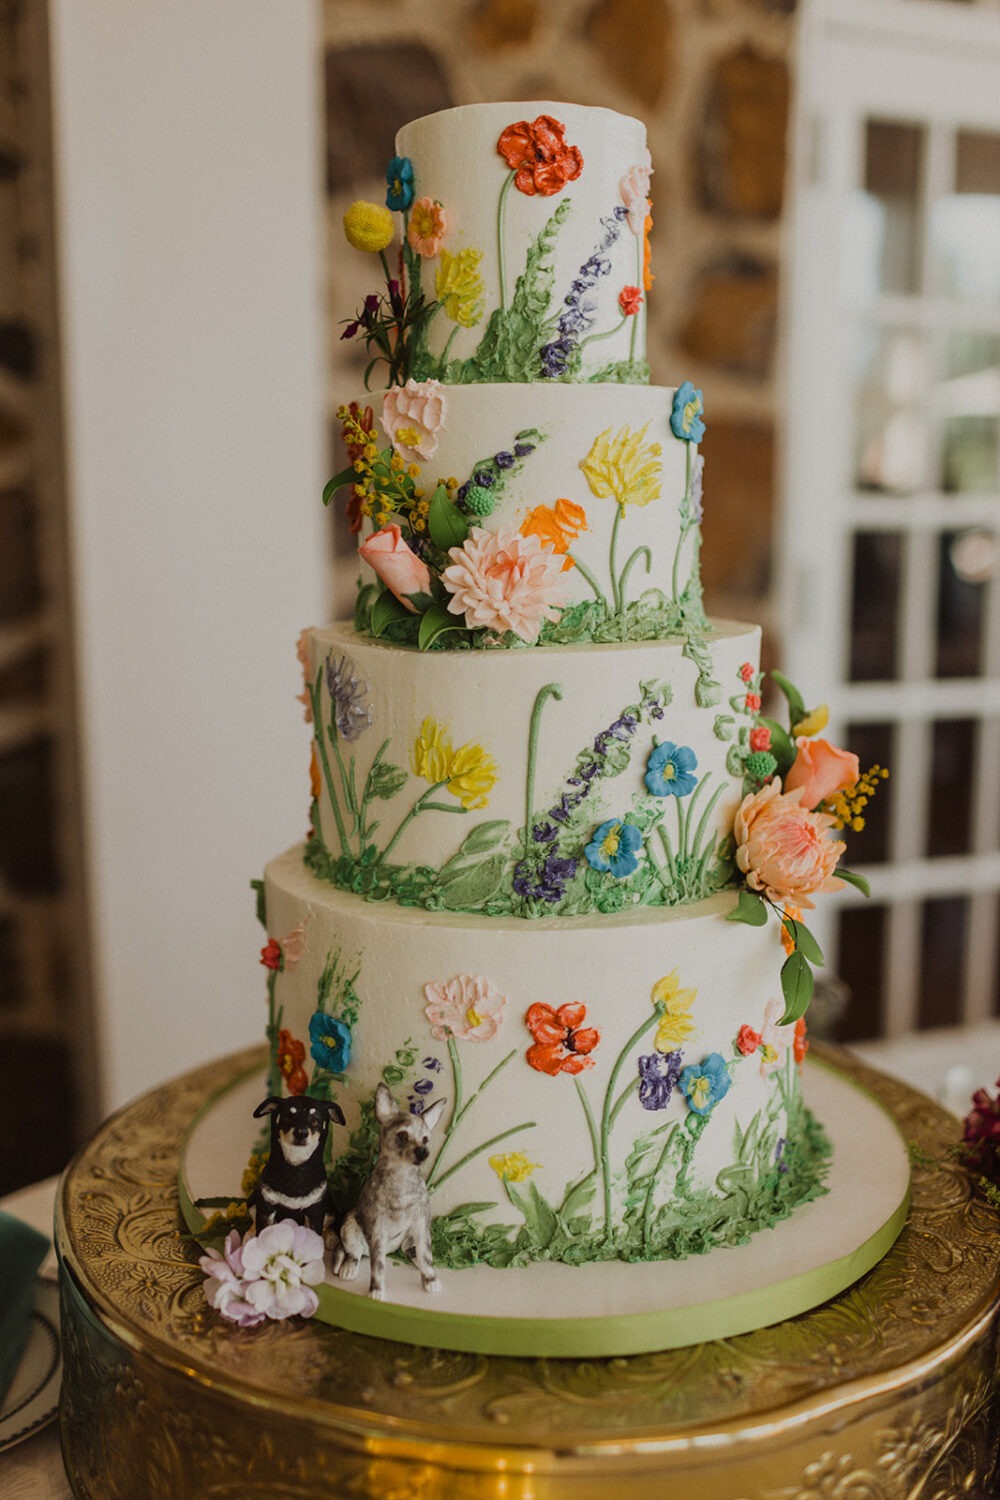 textured cake with flowers and dog figurines 